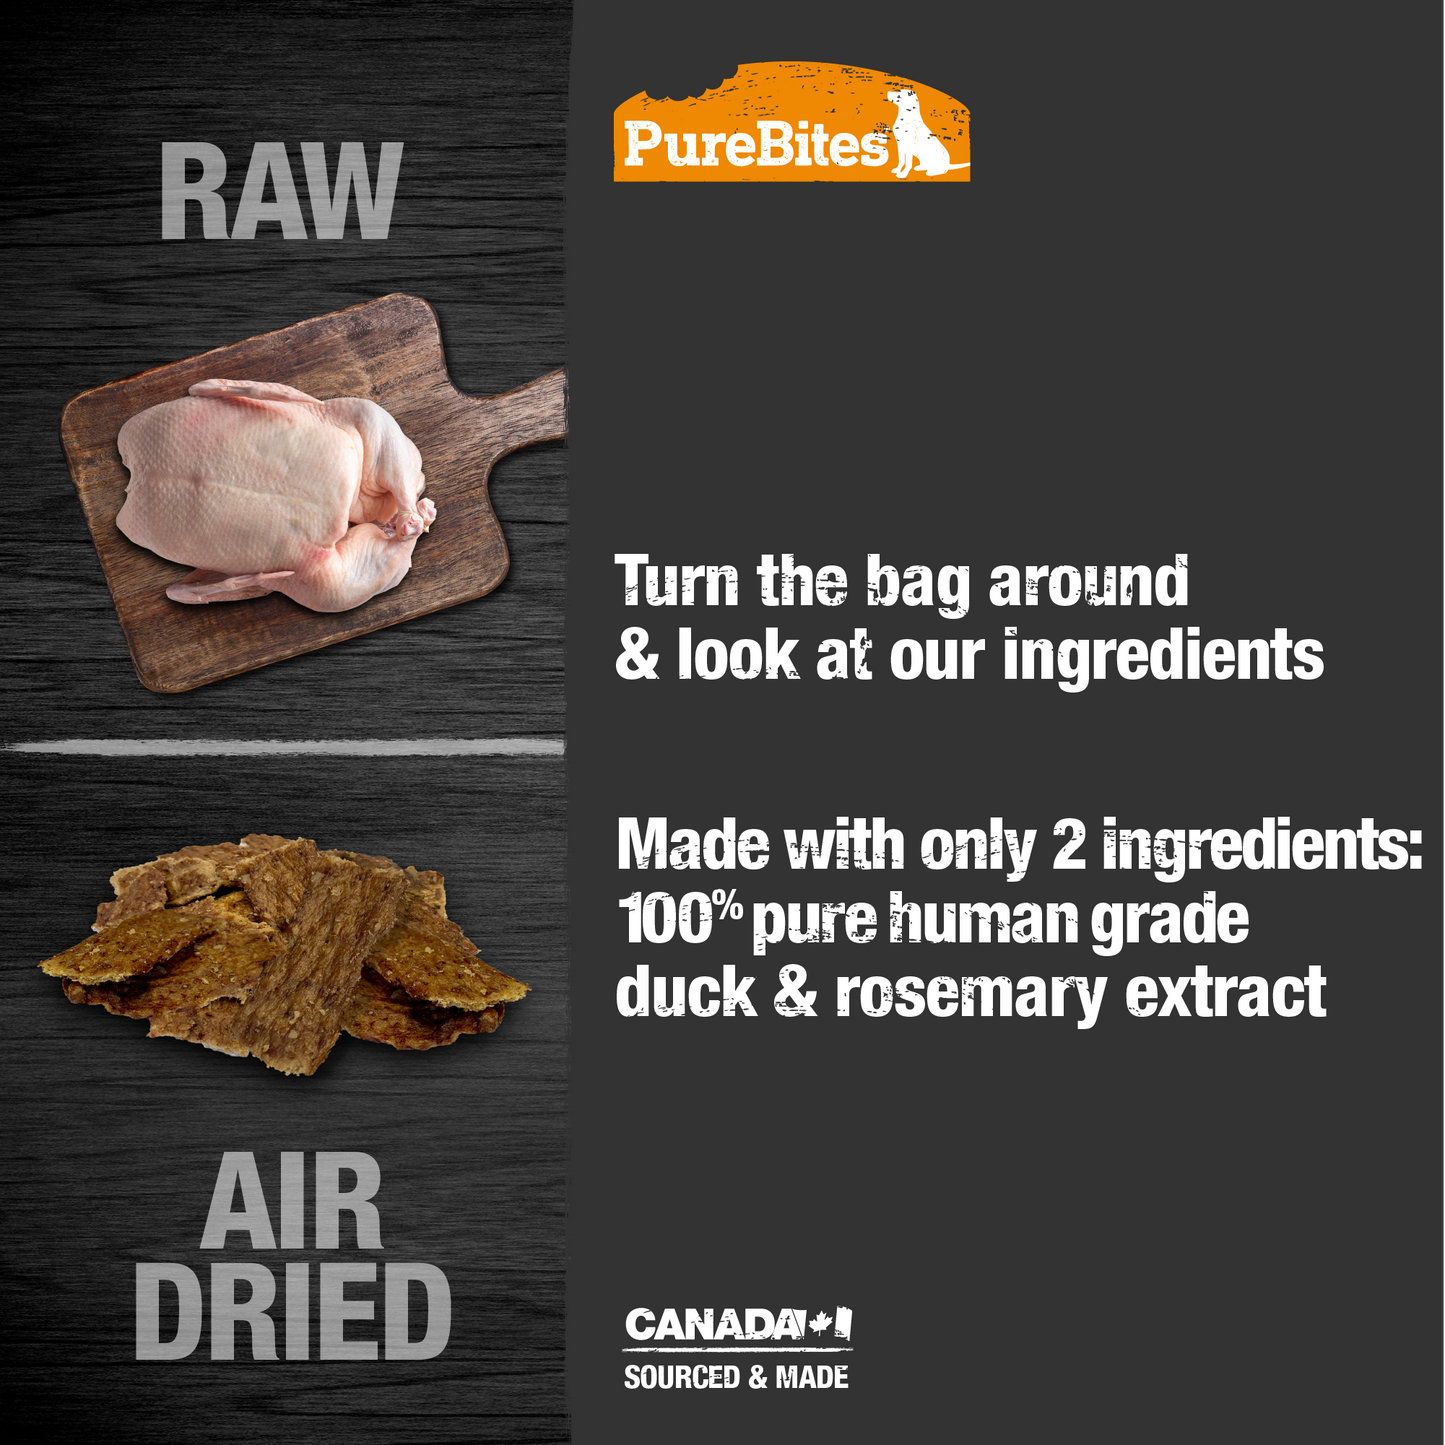 Made with only 2 Ingredients you can read, pronounce, and trust: Canadian sourced human grade duck, rosemary extract.